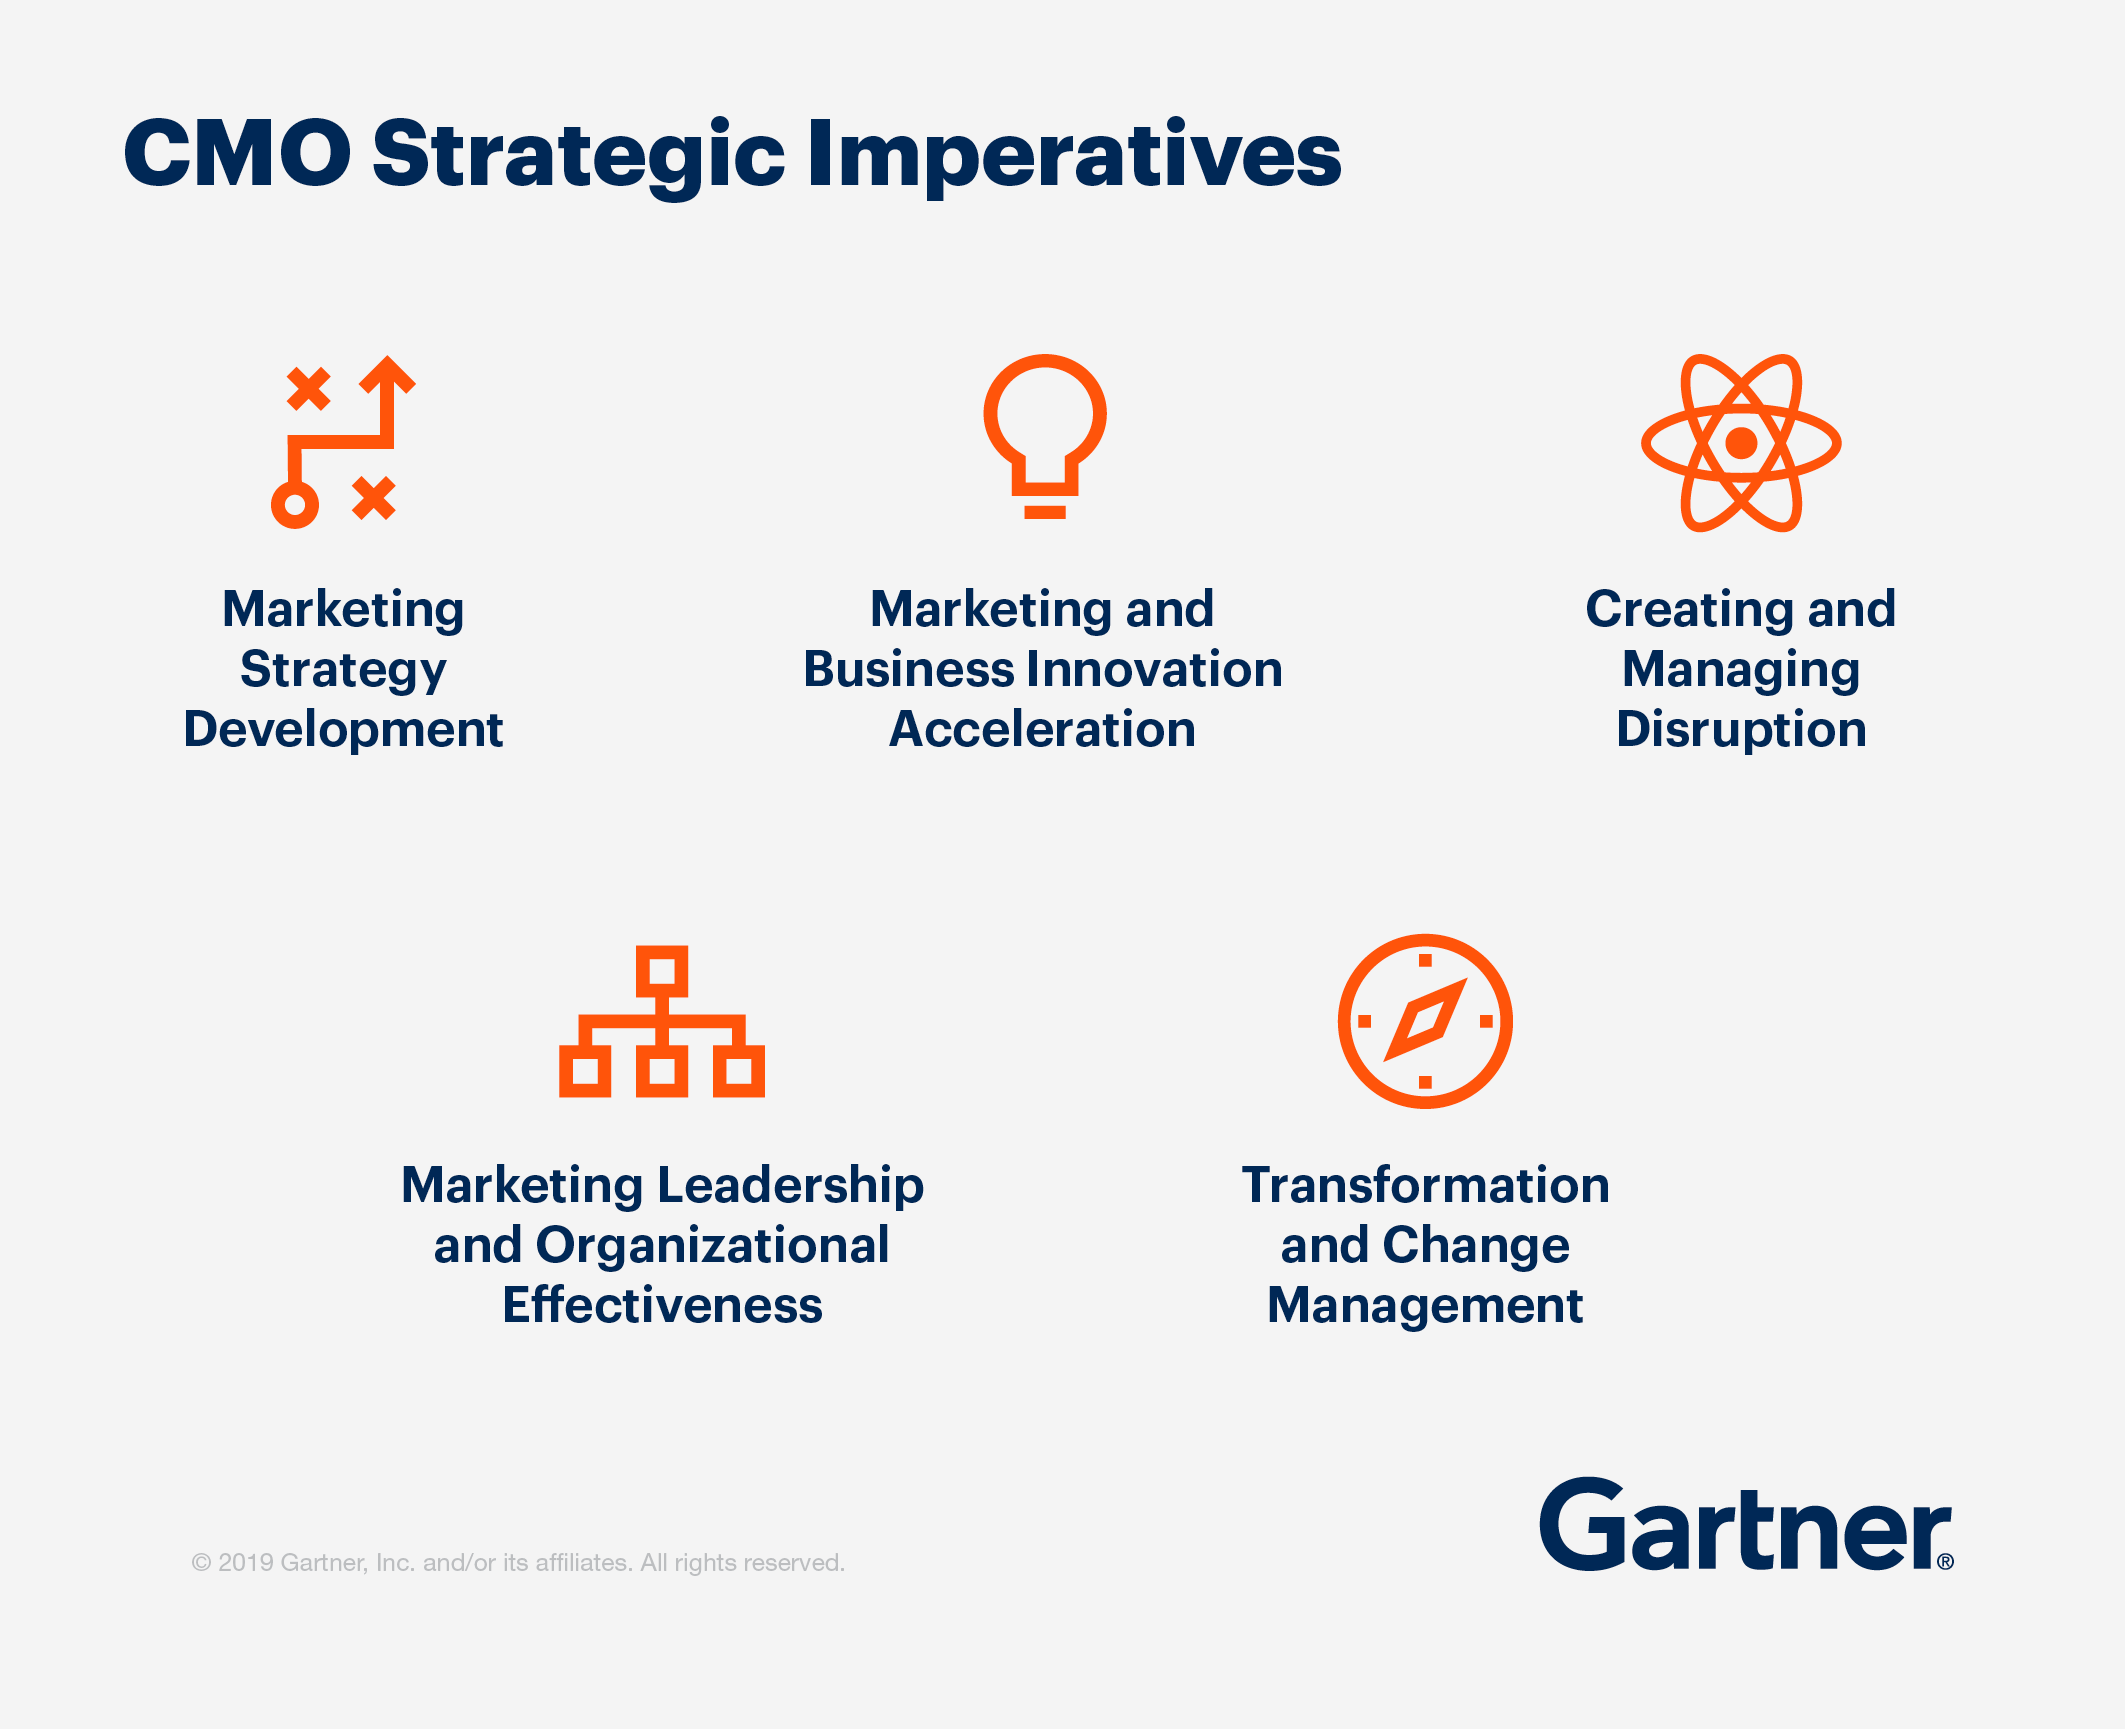 CMO strategic imperatives: marketing strategy development, marketing and business innovation acceleration, creating and managing disruption, marketing leadership and organizational effectiveness, and transformation and change management.